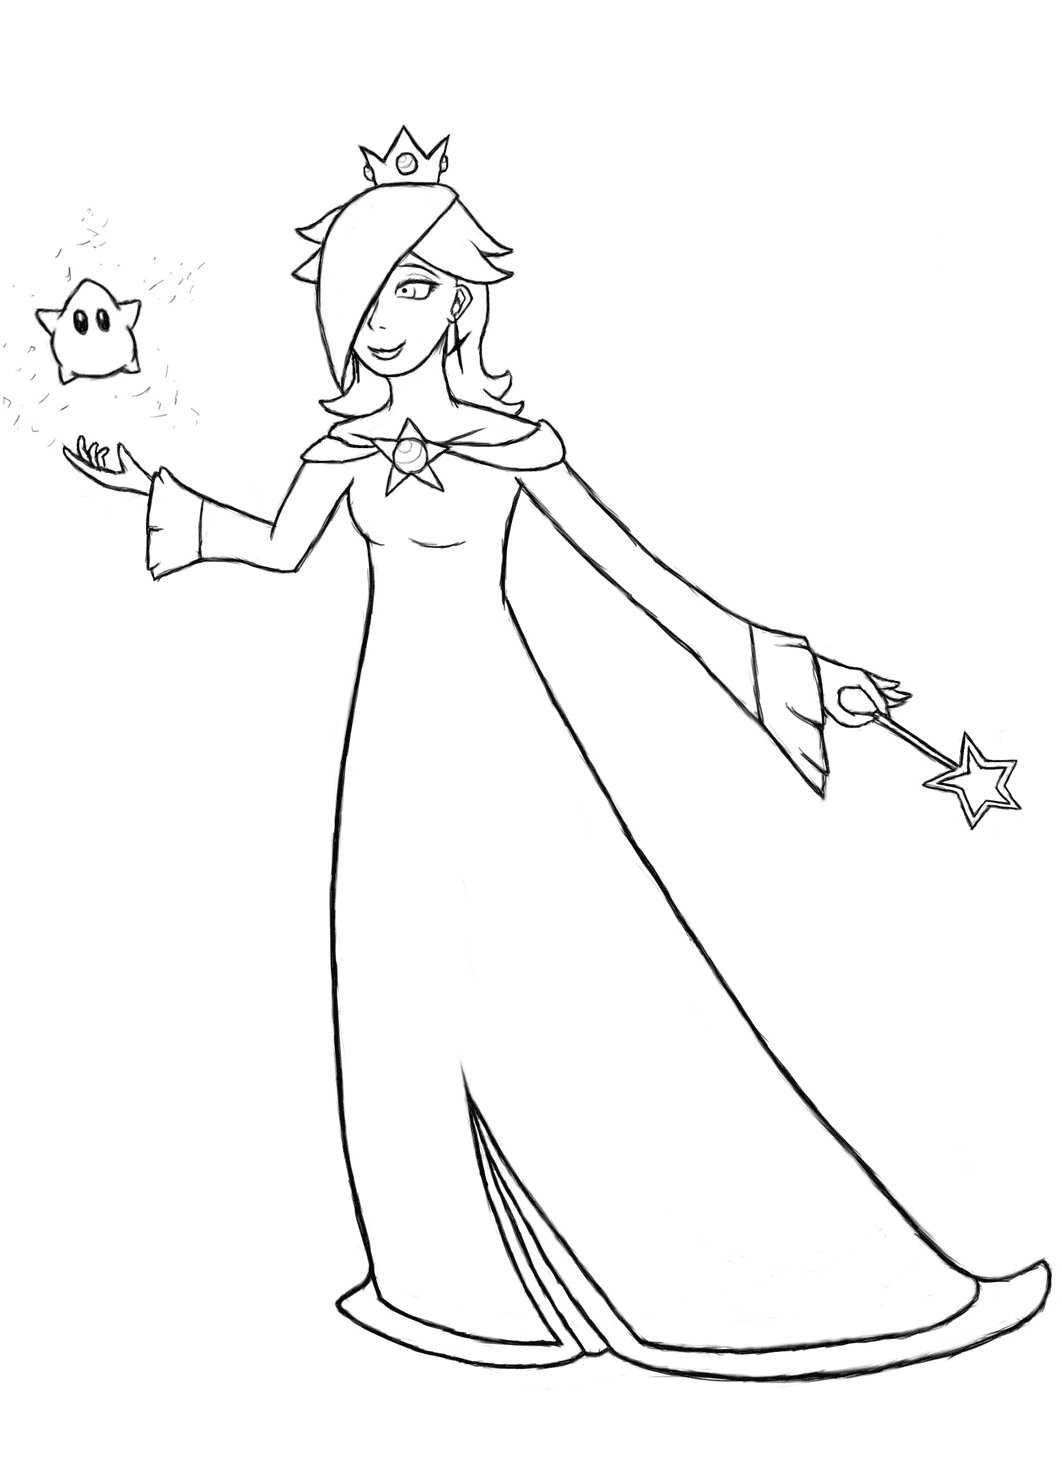 Rosalina and star in Super Mario Bros Coloring Pages